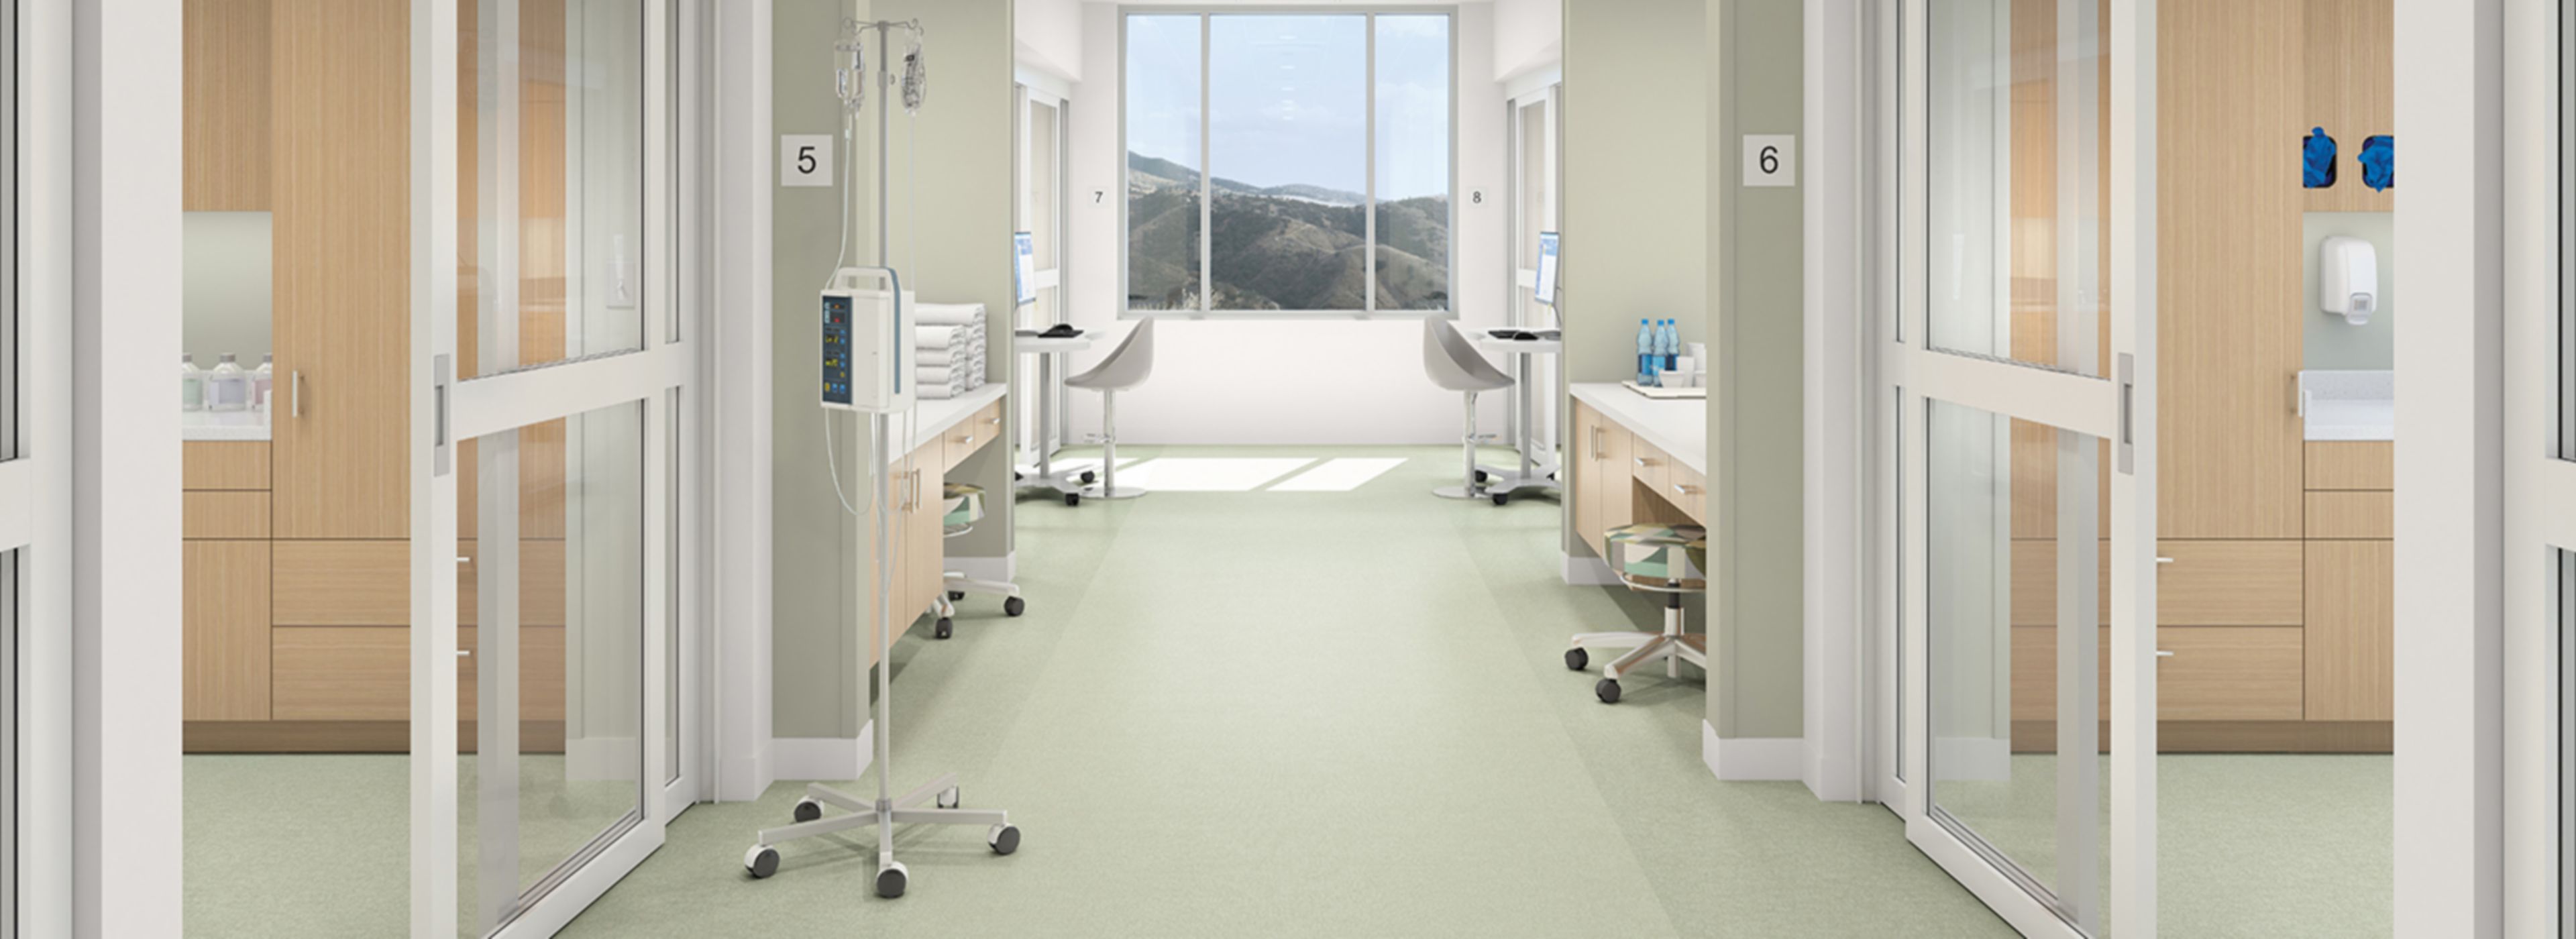 Interface Spike-tacular and Bloom with a View vinyl sheet in hospital corridor and patient rooms numéro d’image 1